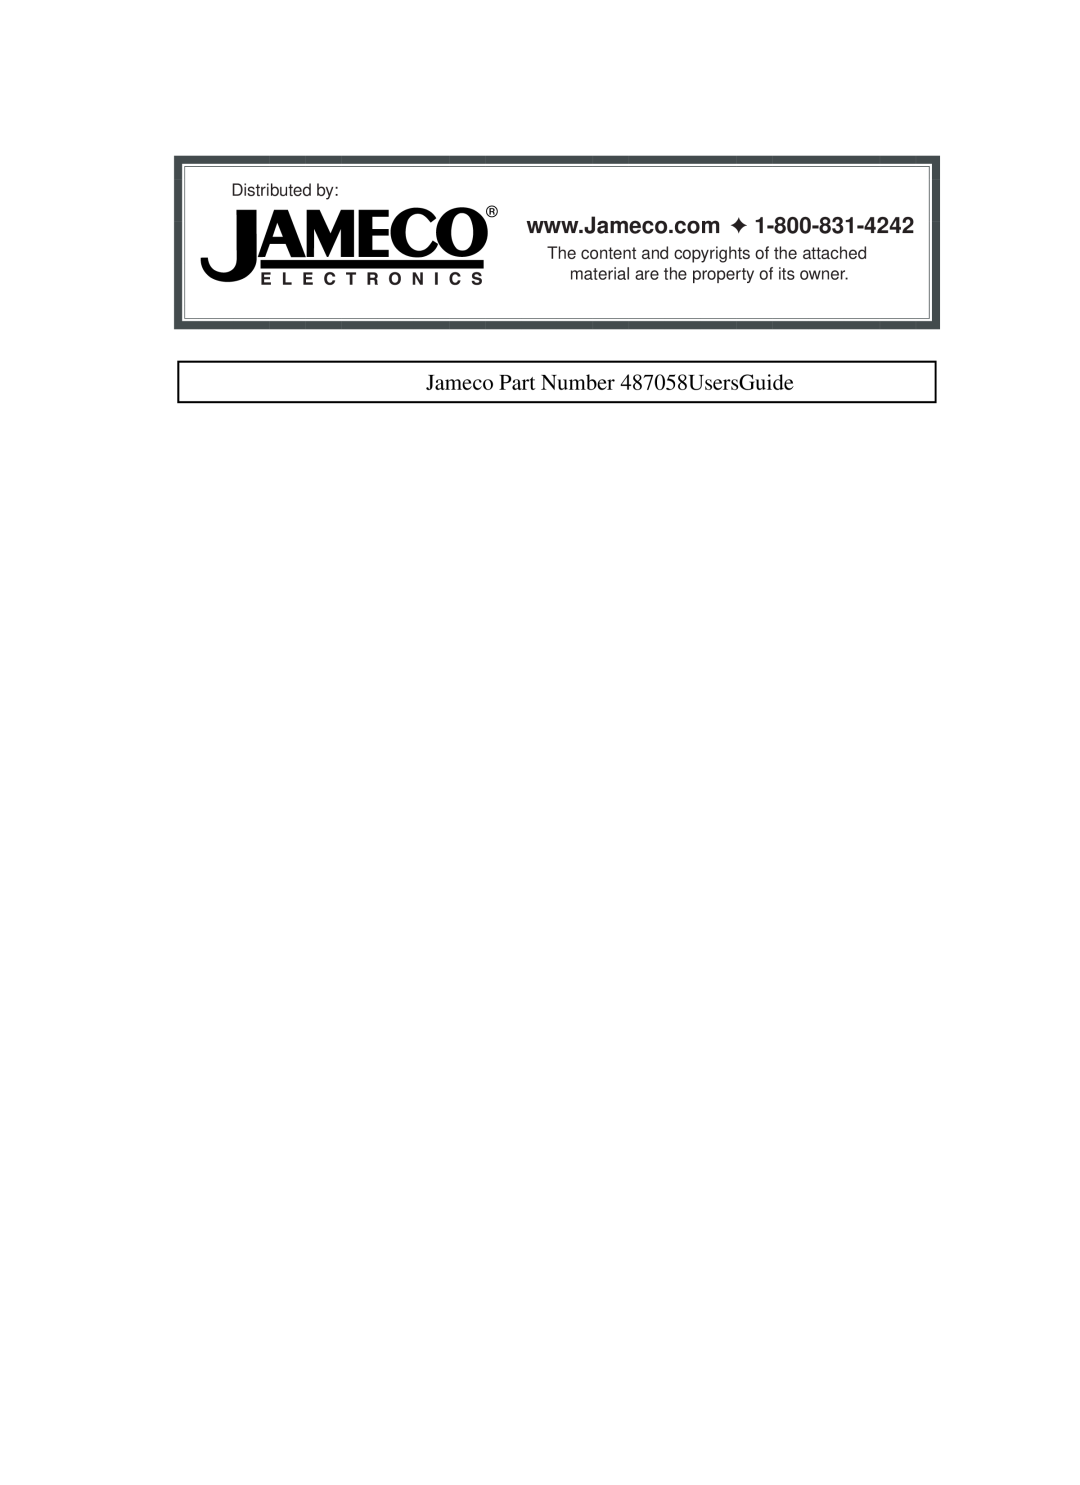 Cisco Systems WRT54G manual Jameco Part Number 487058UsersGuide, Distributed by 